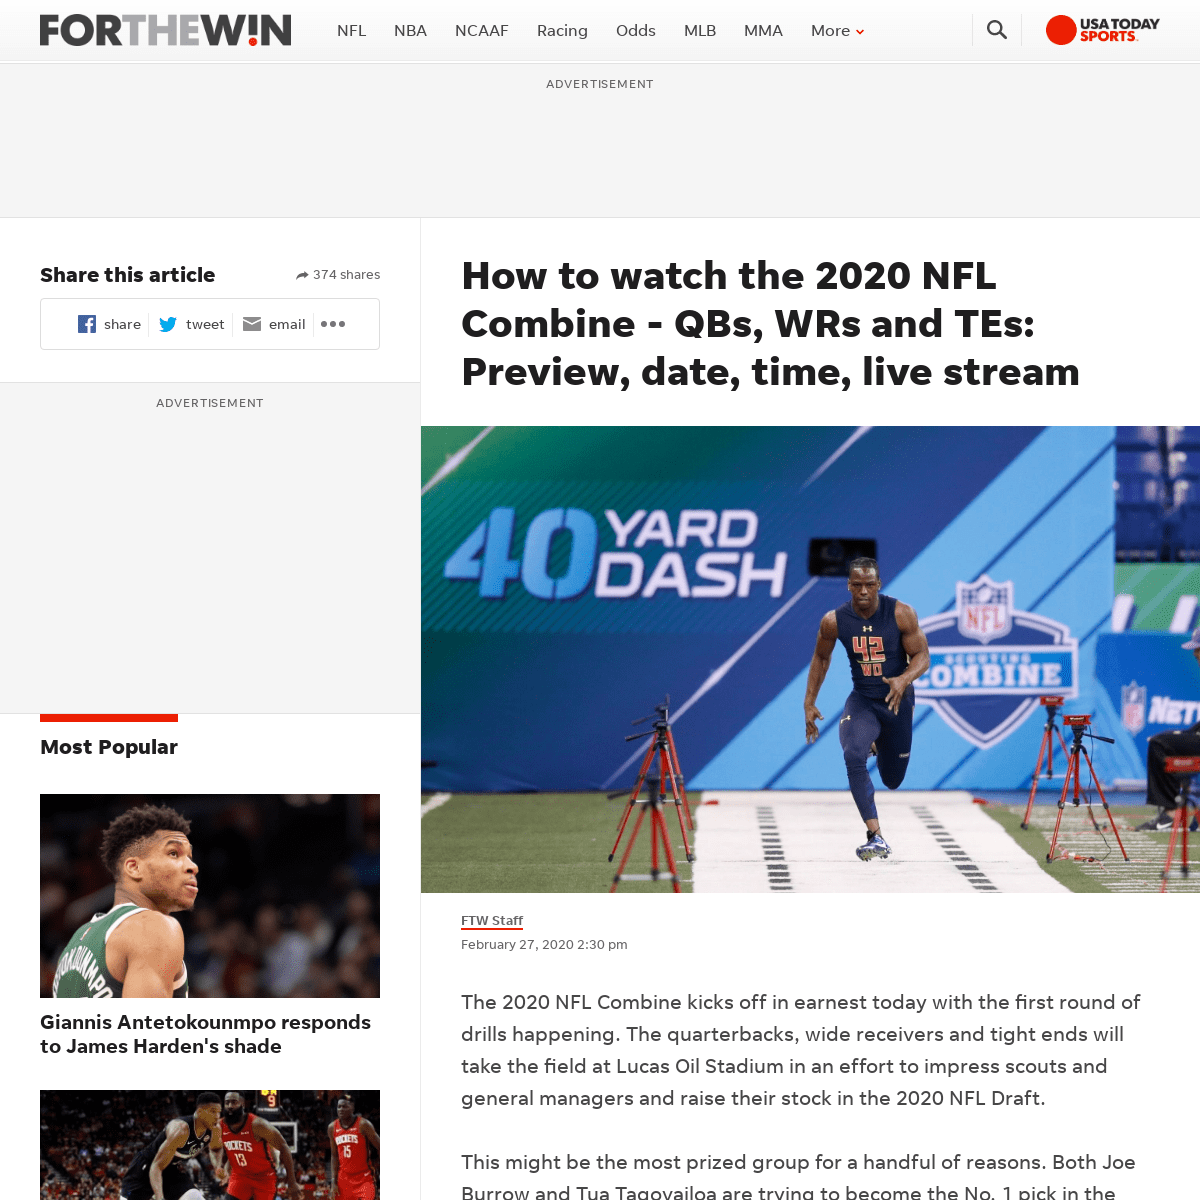 A complete backup of ftw.usatoday.com/2020/02/how-to-watch-2020-nfl-scouting-combine-qb-wr-te-nfl-combine-results-fastest-40-yar